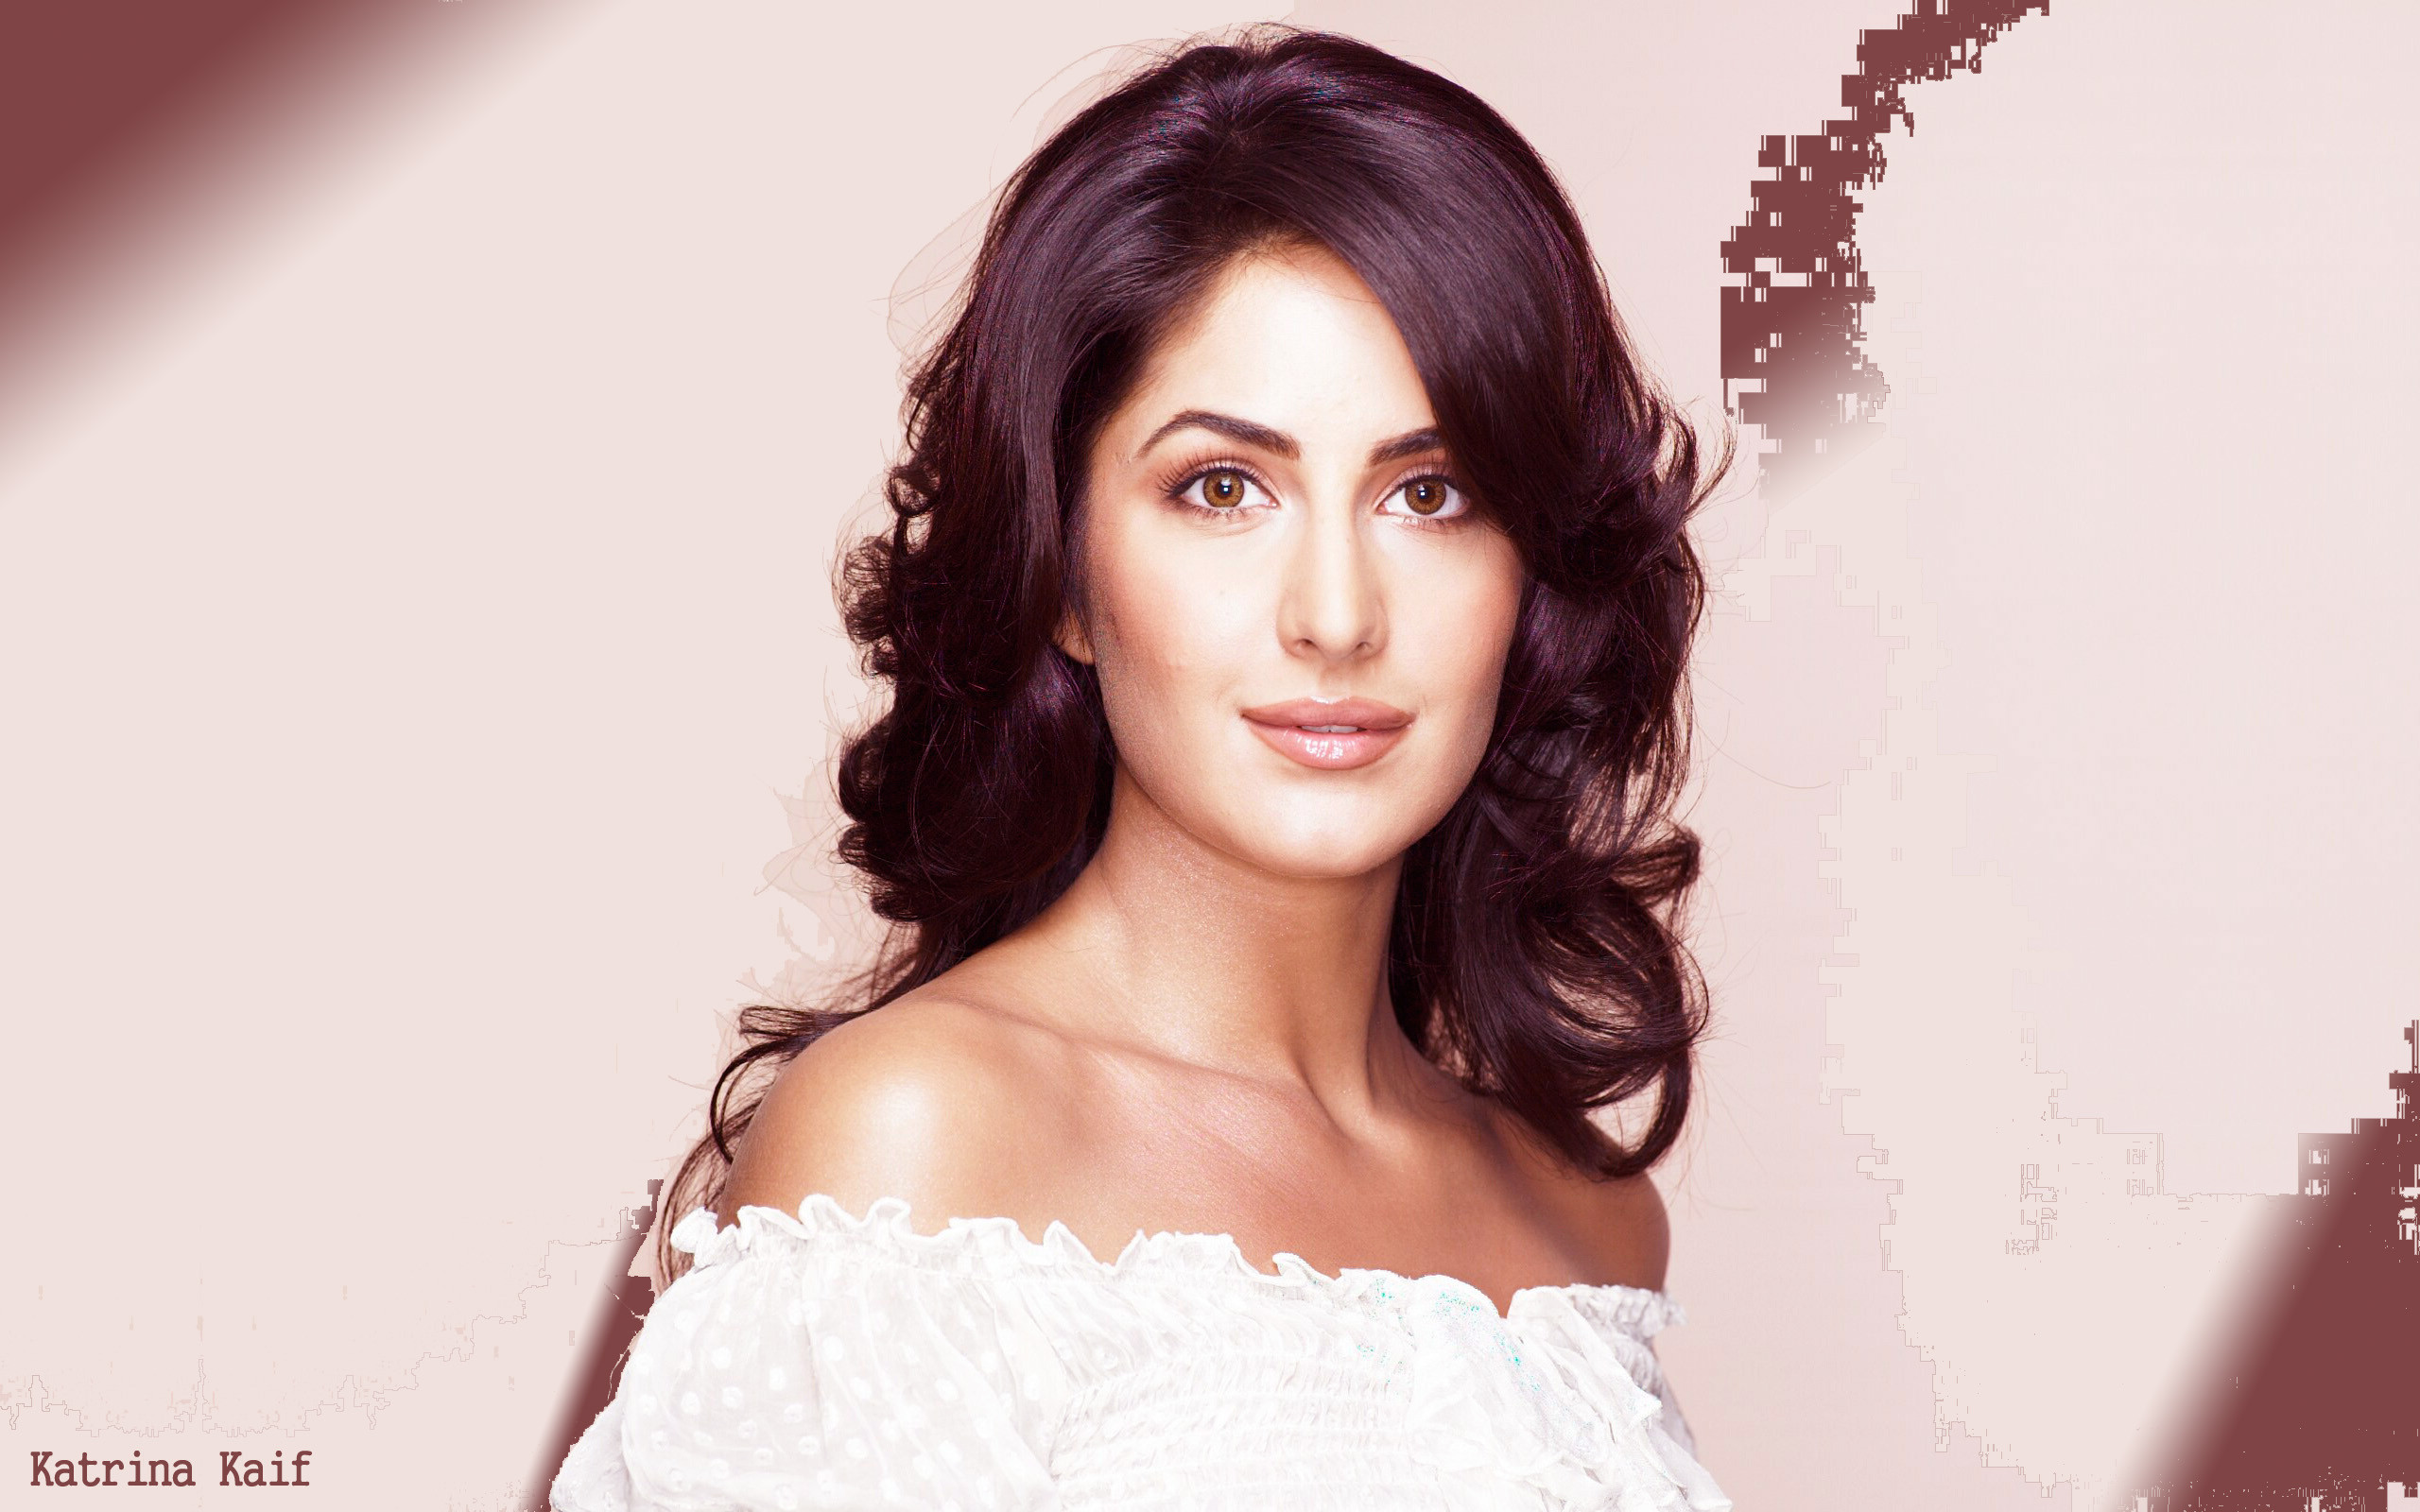 2560x1600 ... The Image Attachment of Katrina Kaif Photo for Indian Celebrity  Wallpaper